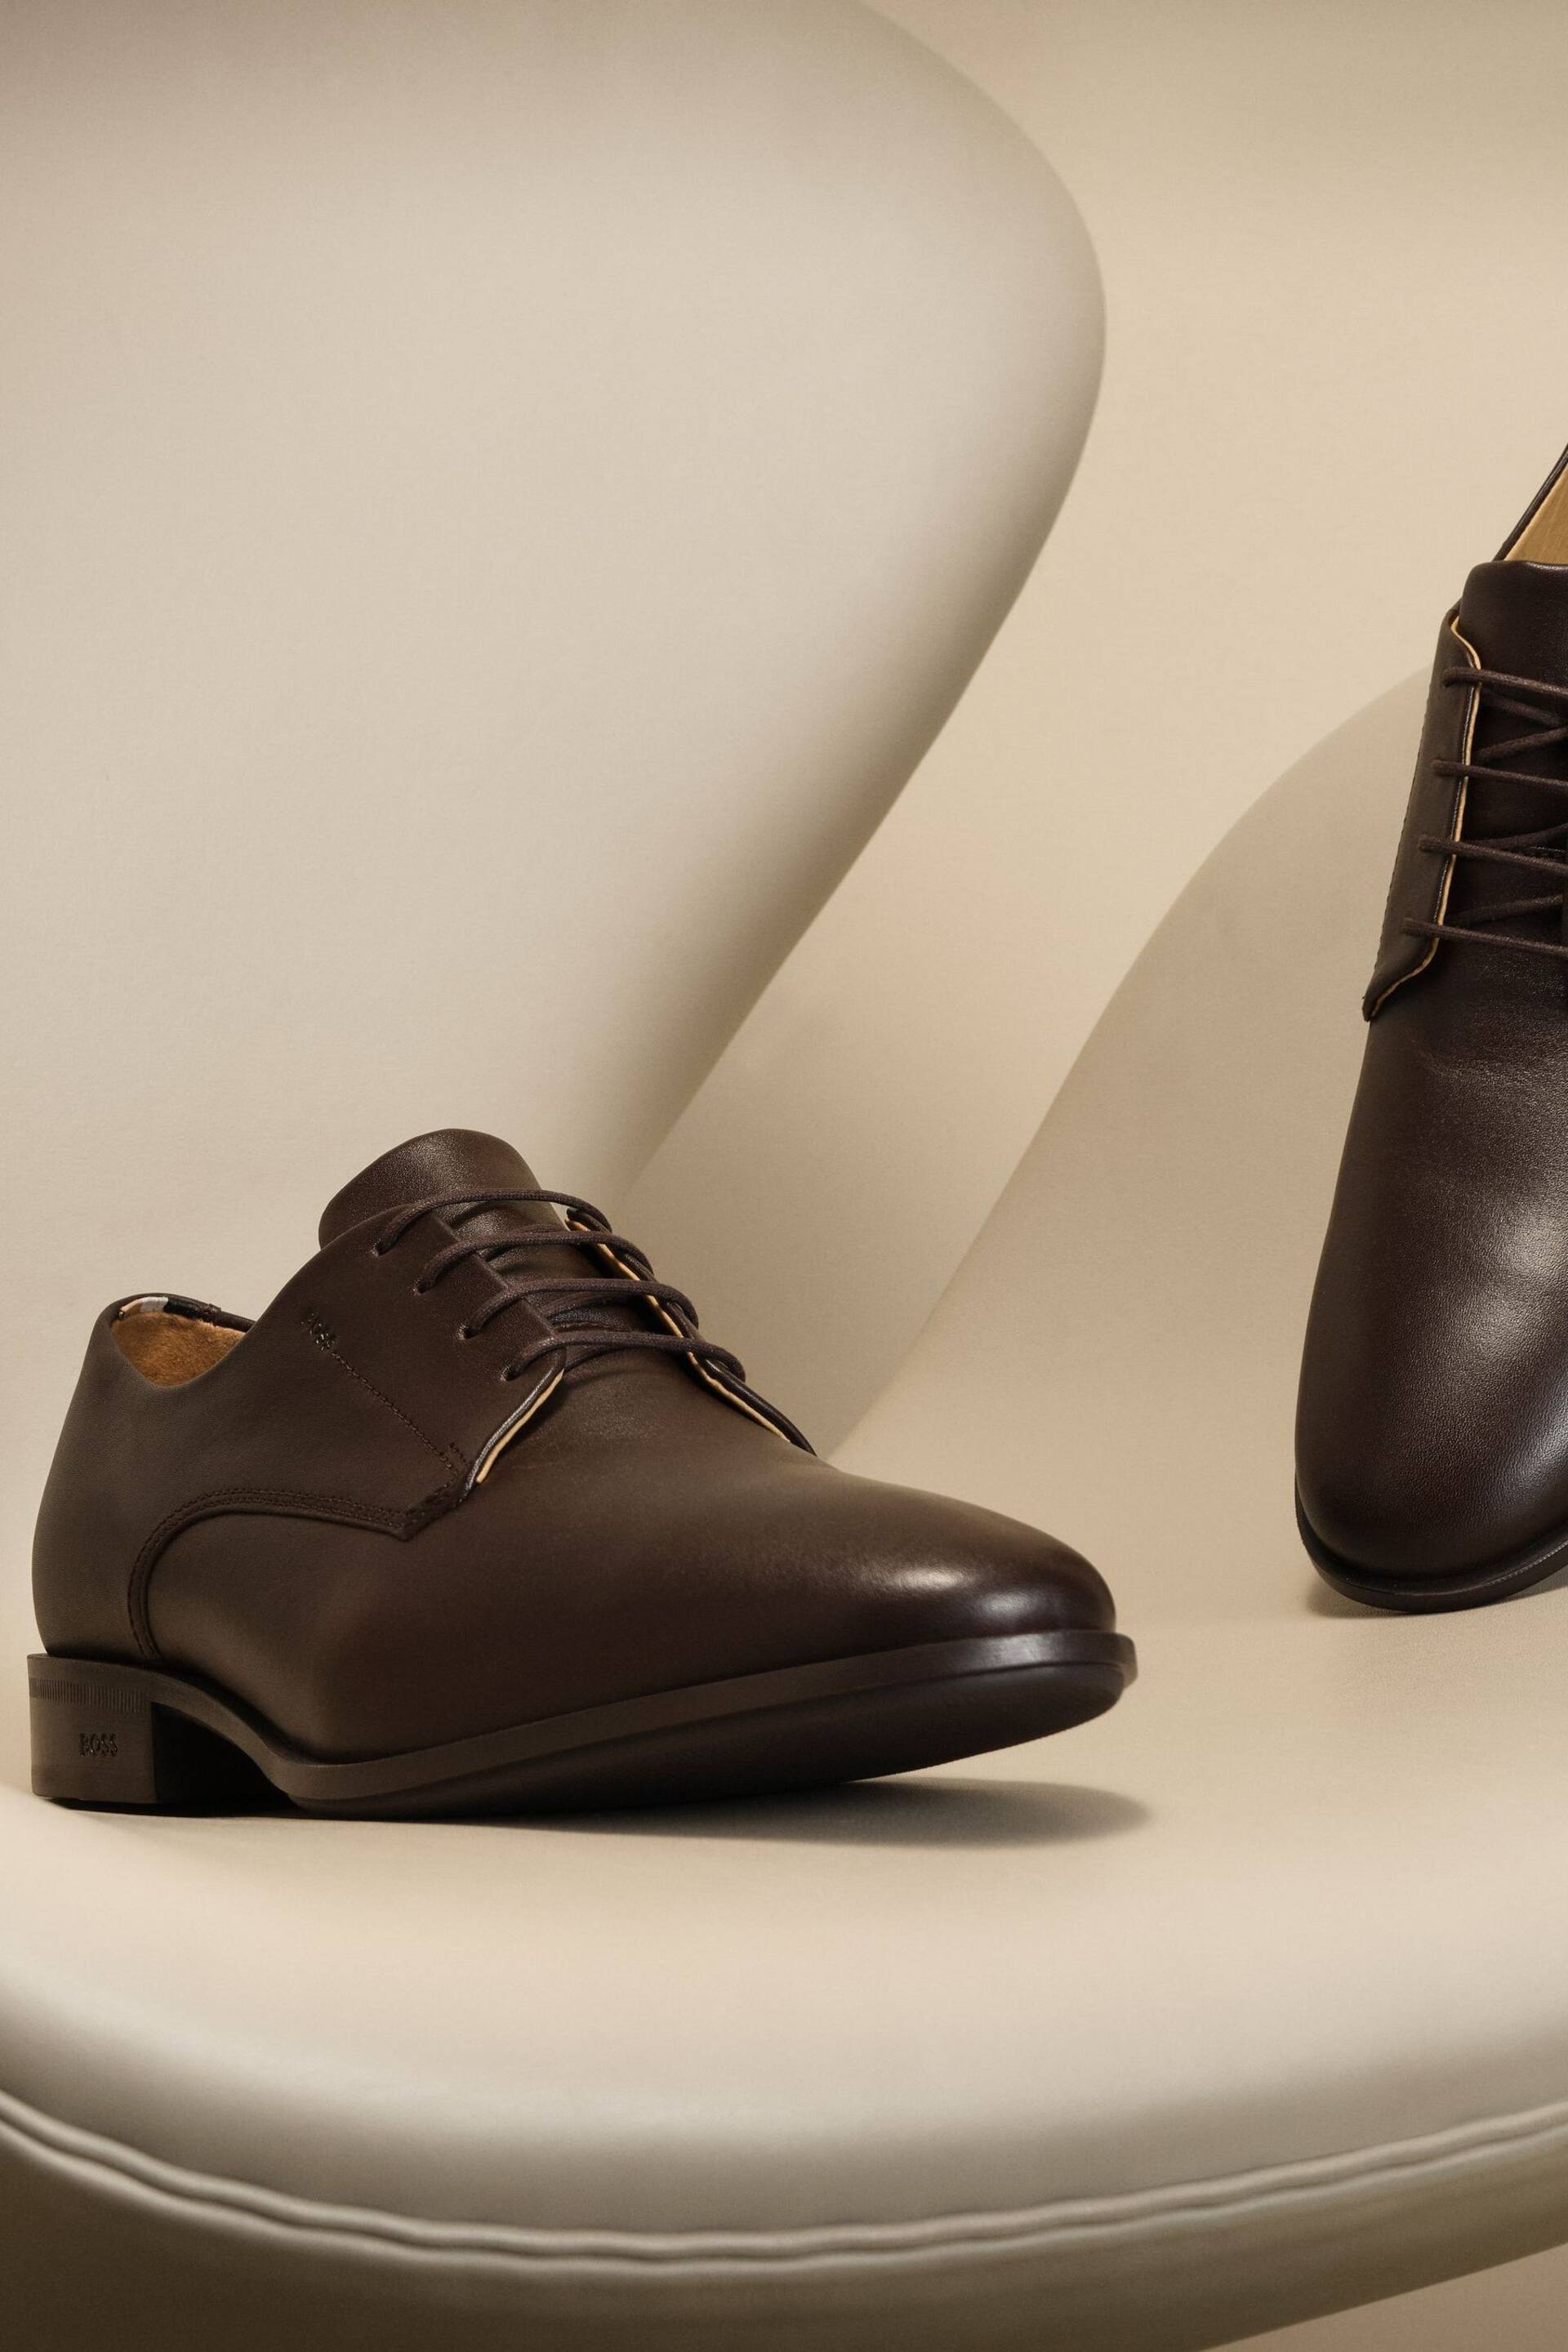 BOSS Brown Colby Shoes - Image 1 of 5